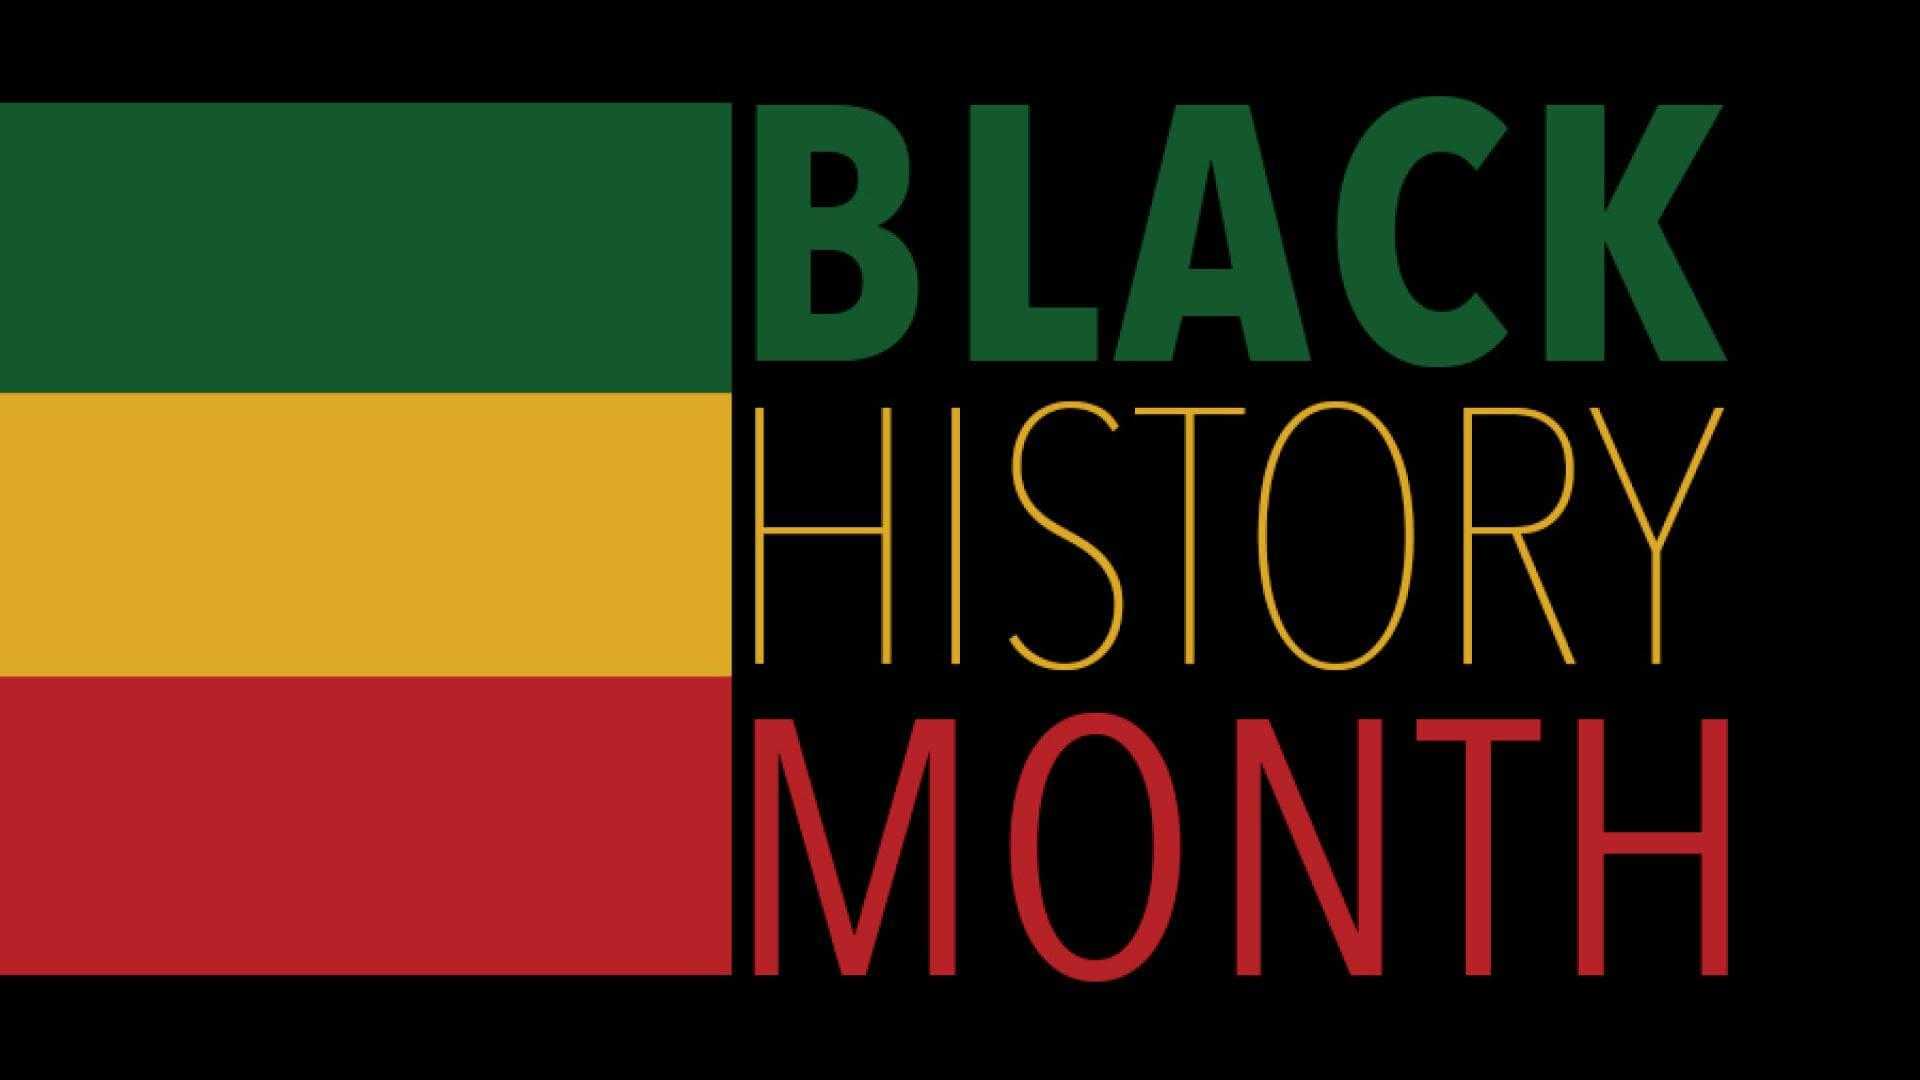 Black History Month Wallpaper - Kolpaper - Awesome Free Hd Wallpapers